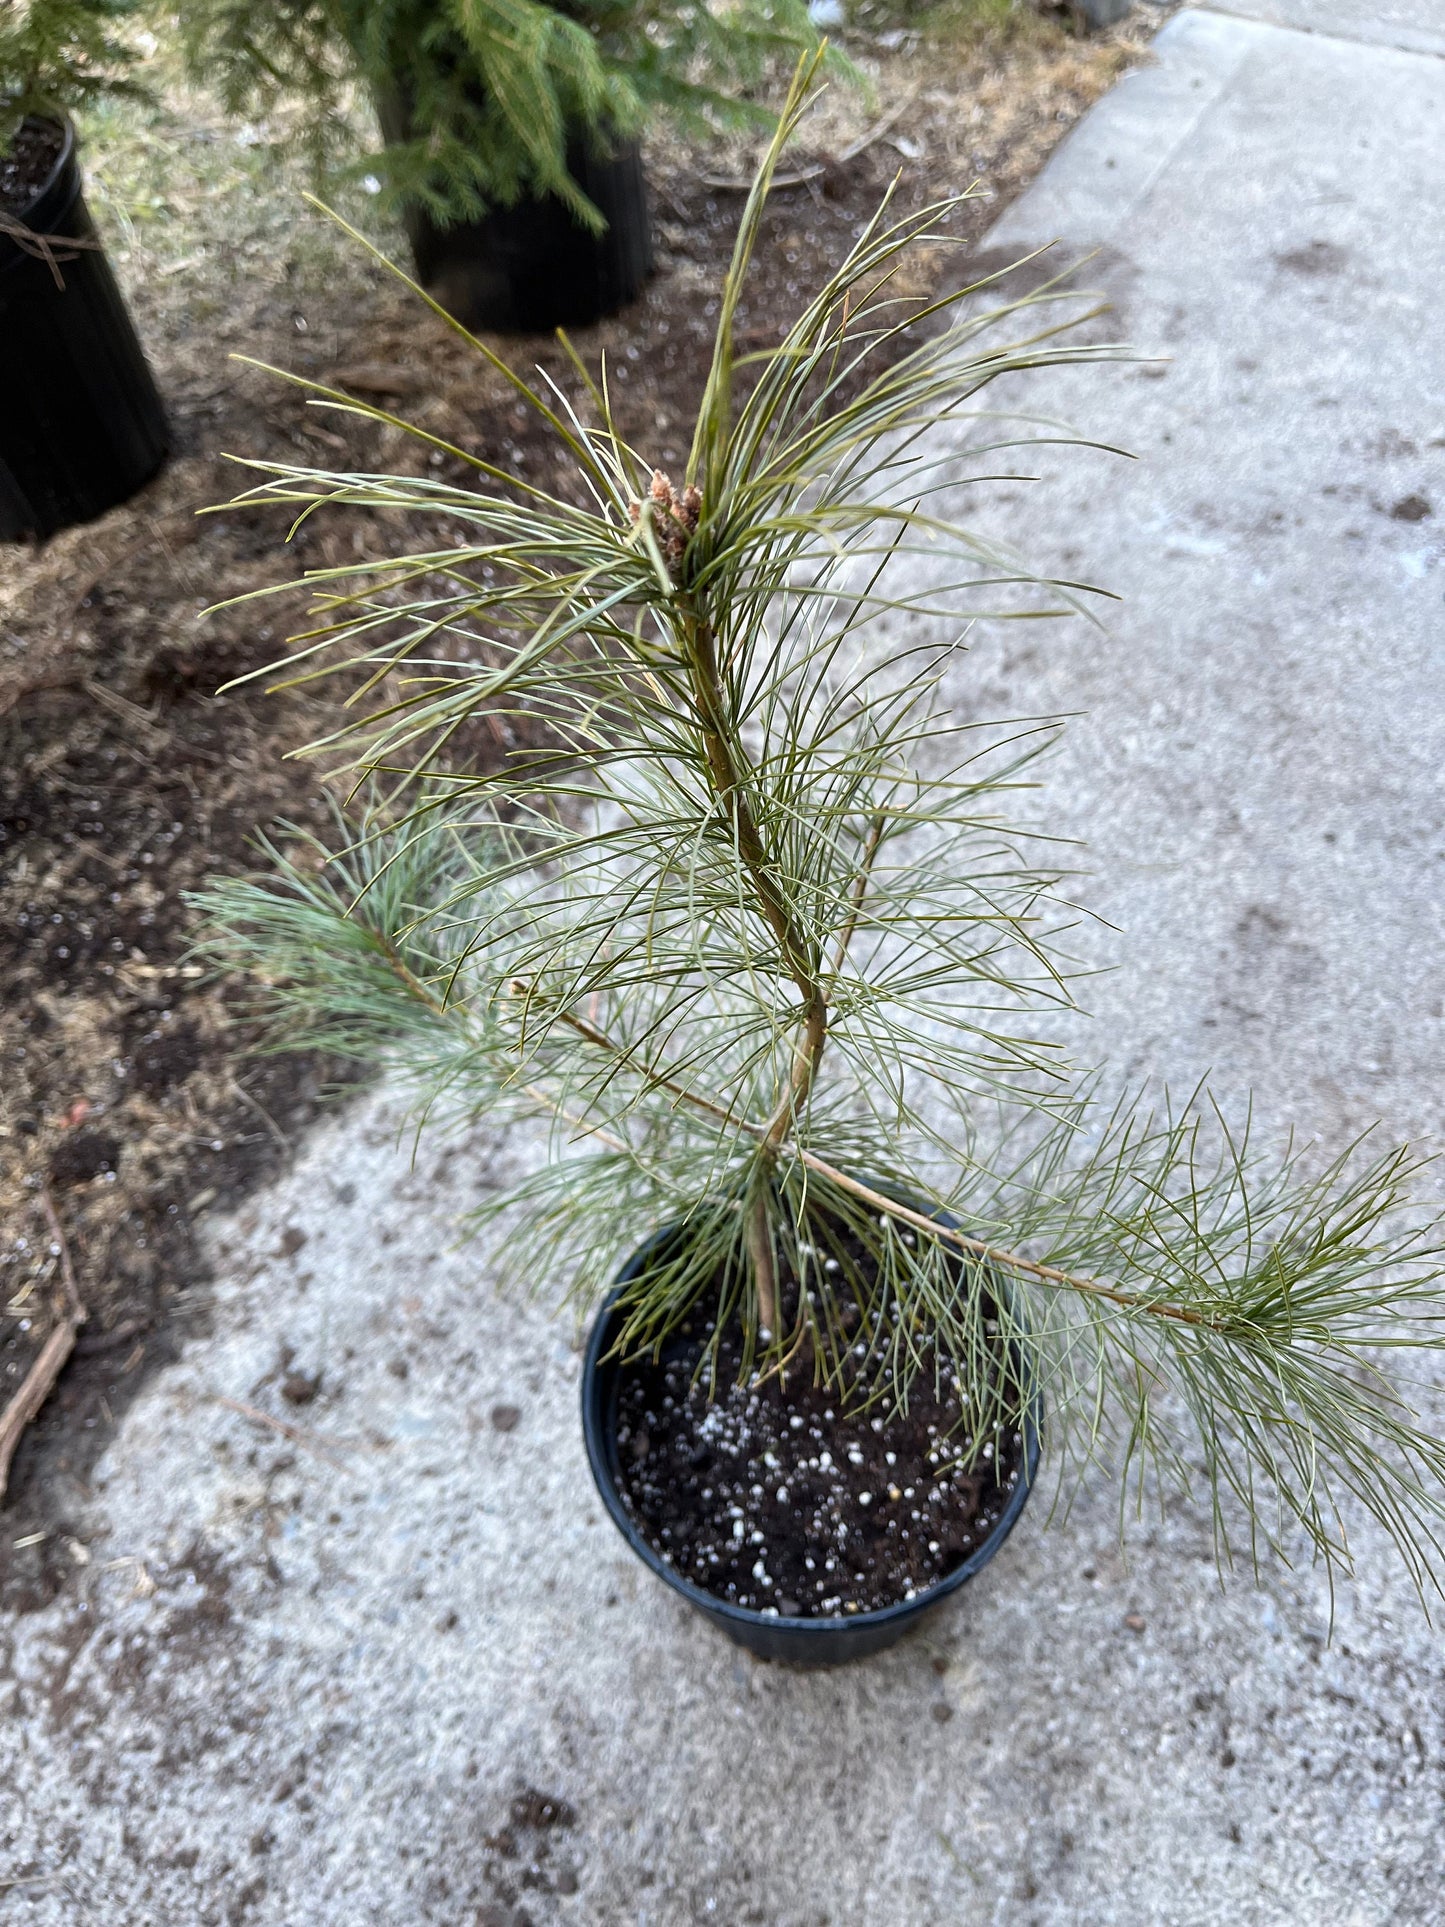 Eastern White Pine Seedling - Fast Growing - 1 Gallon size - Fast Growing Tree - Low Maintenance - 1 to 3 Feet - Soft Needles - Live Plant